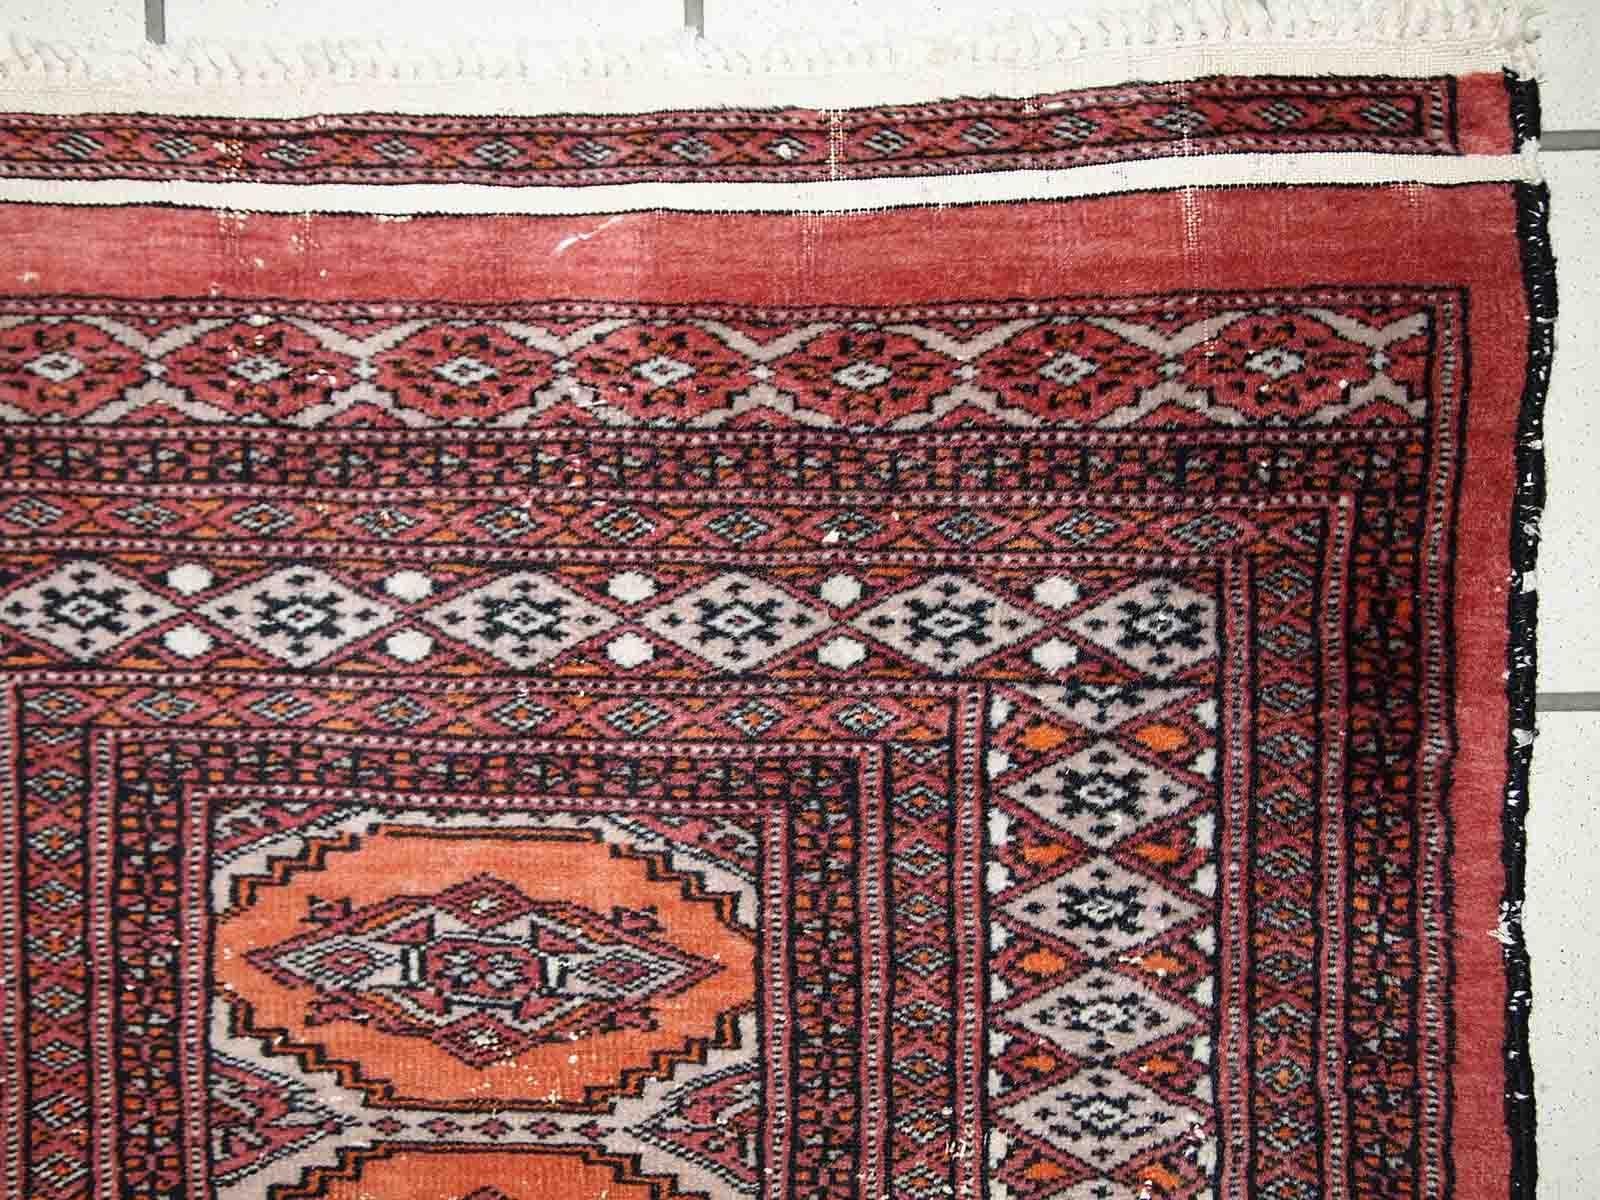 Handmade vintage Uzbek Bukhara distressed rug in traditional design. The rug is from the end of 20th century, it has some low pile.

-condition: distressed,

-circa: 1960s,

-size: 2.4' x 4.3' (75cm x 132cm),
?
-material: wool,

-country